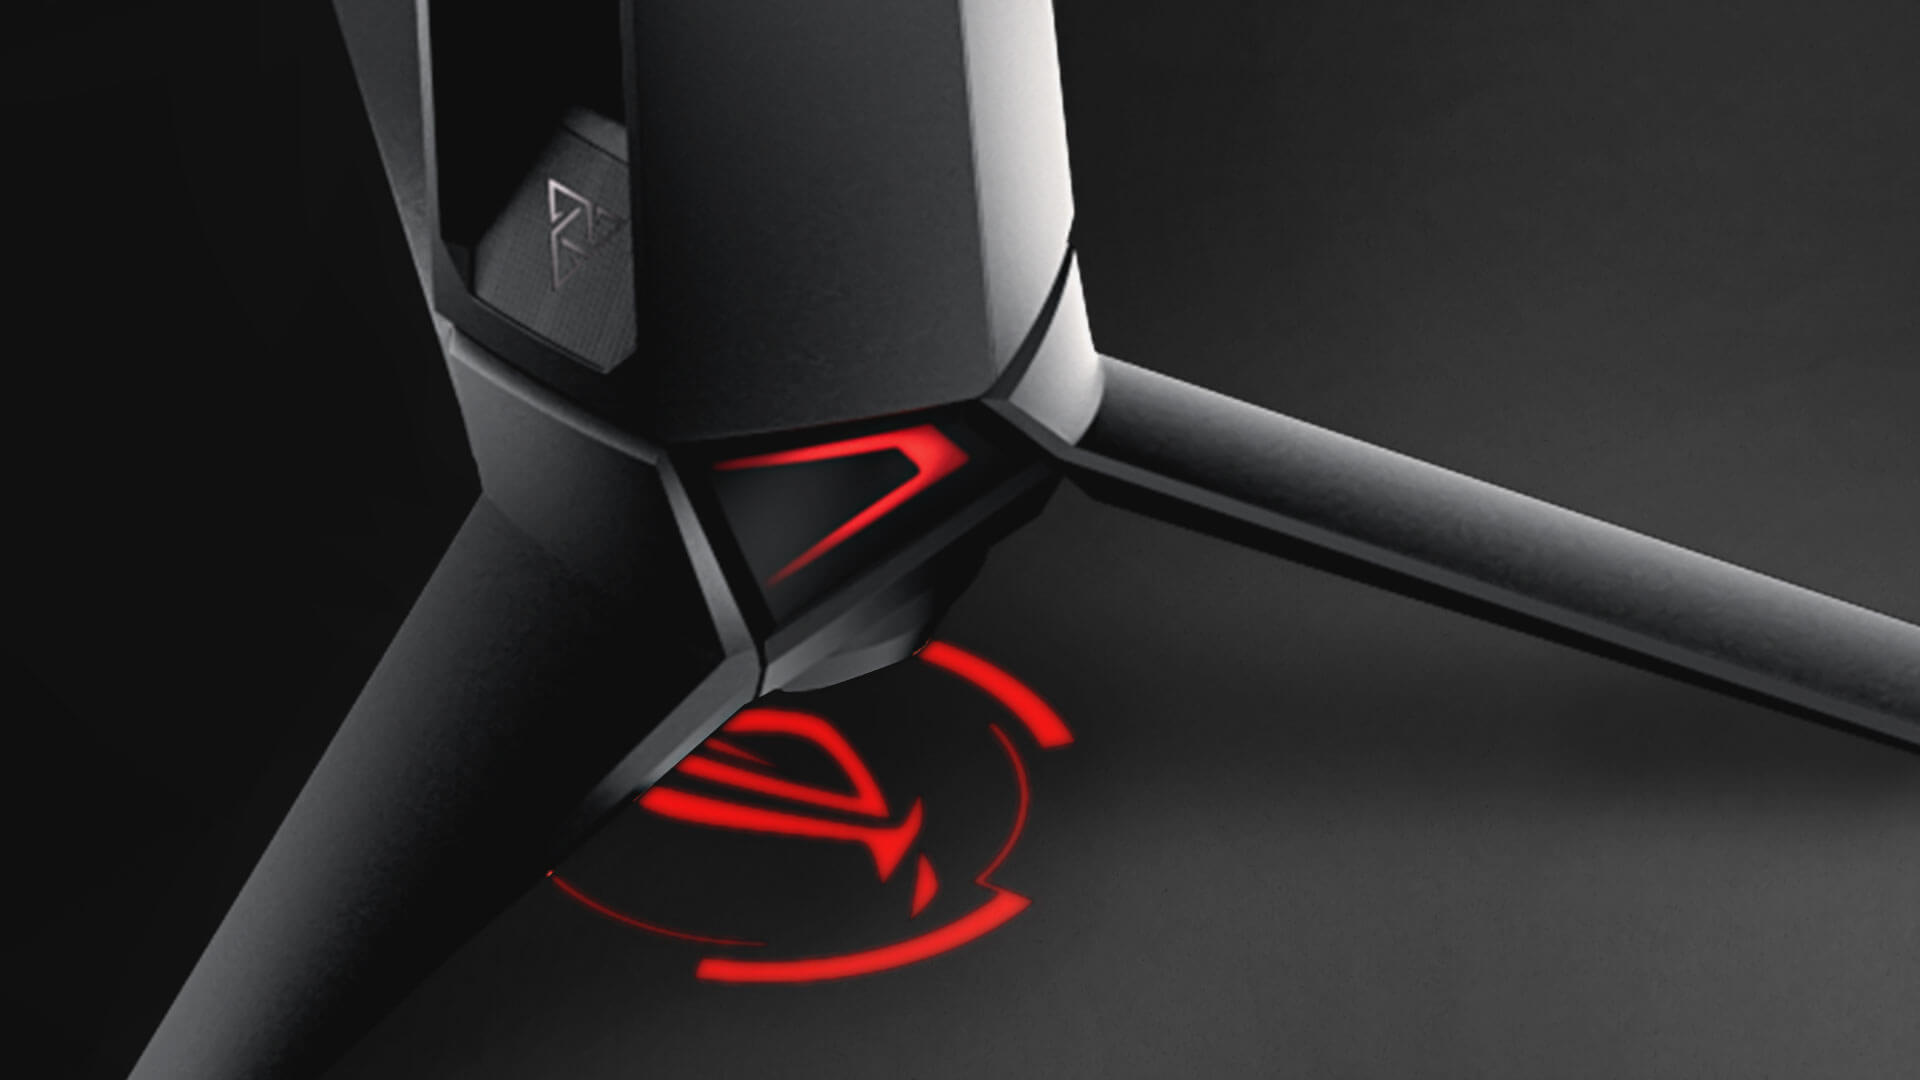 Product photo showing the projected ROG logo on the underside of the monitor stand.